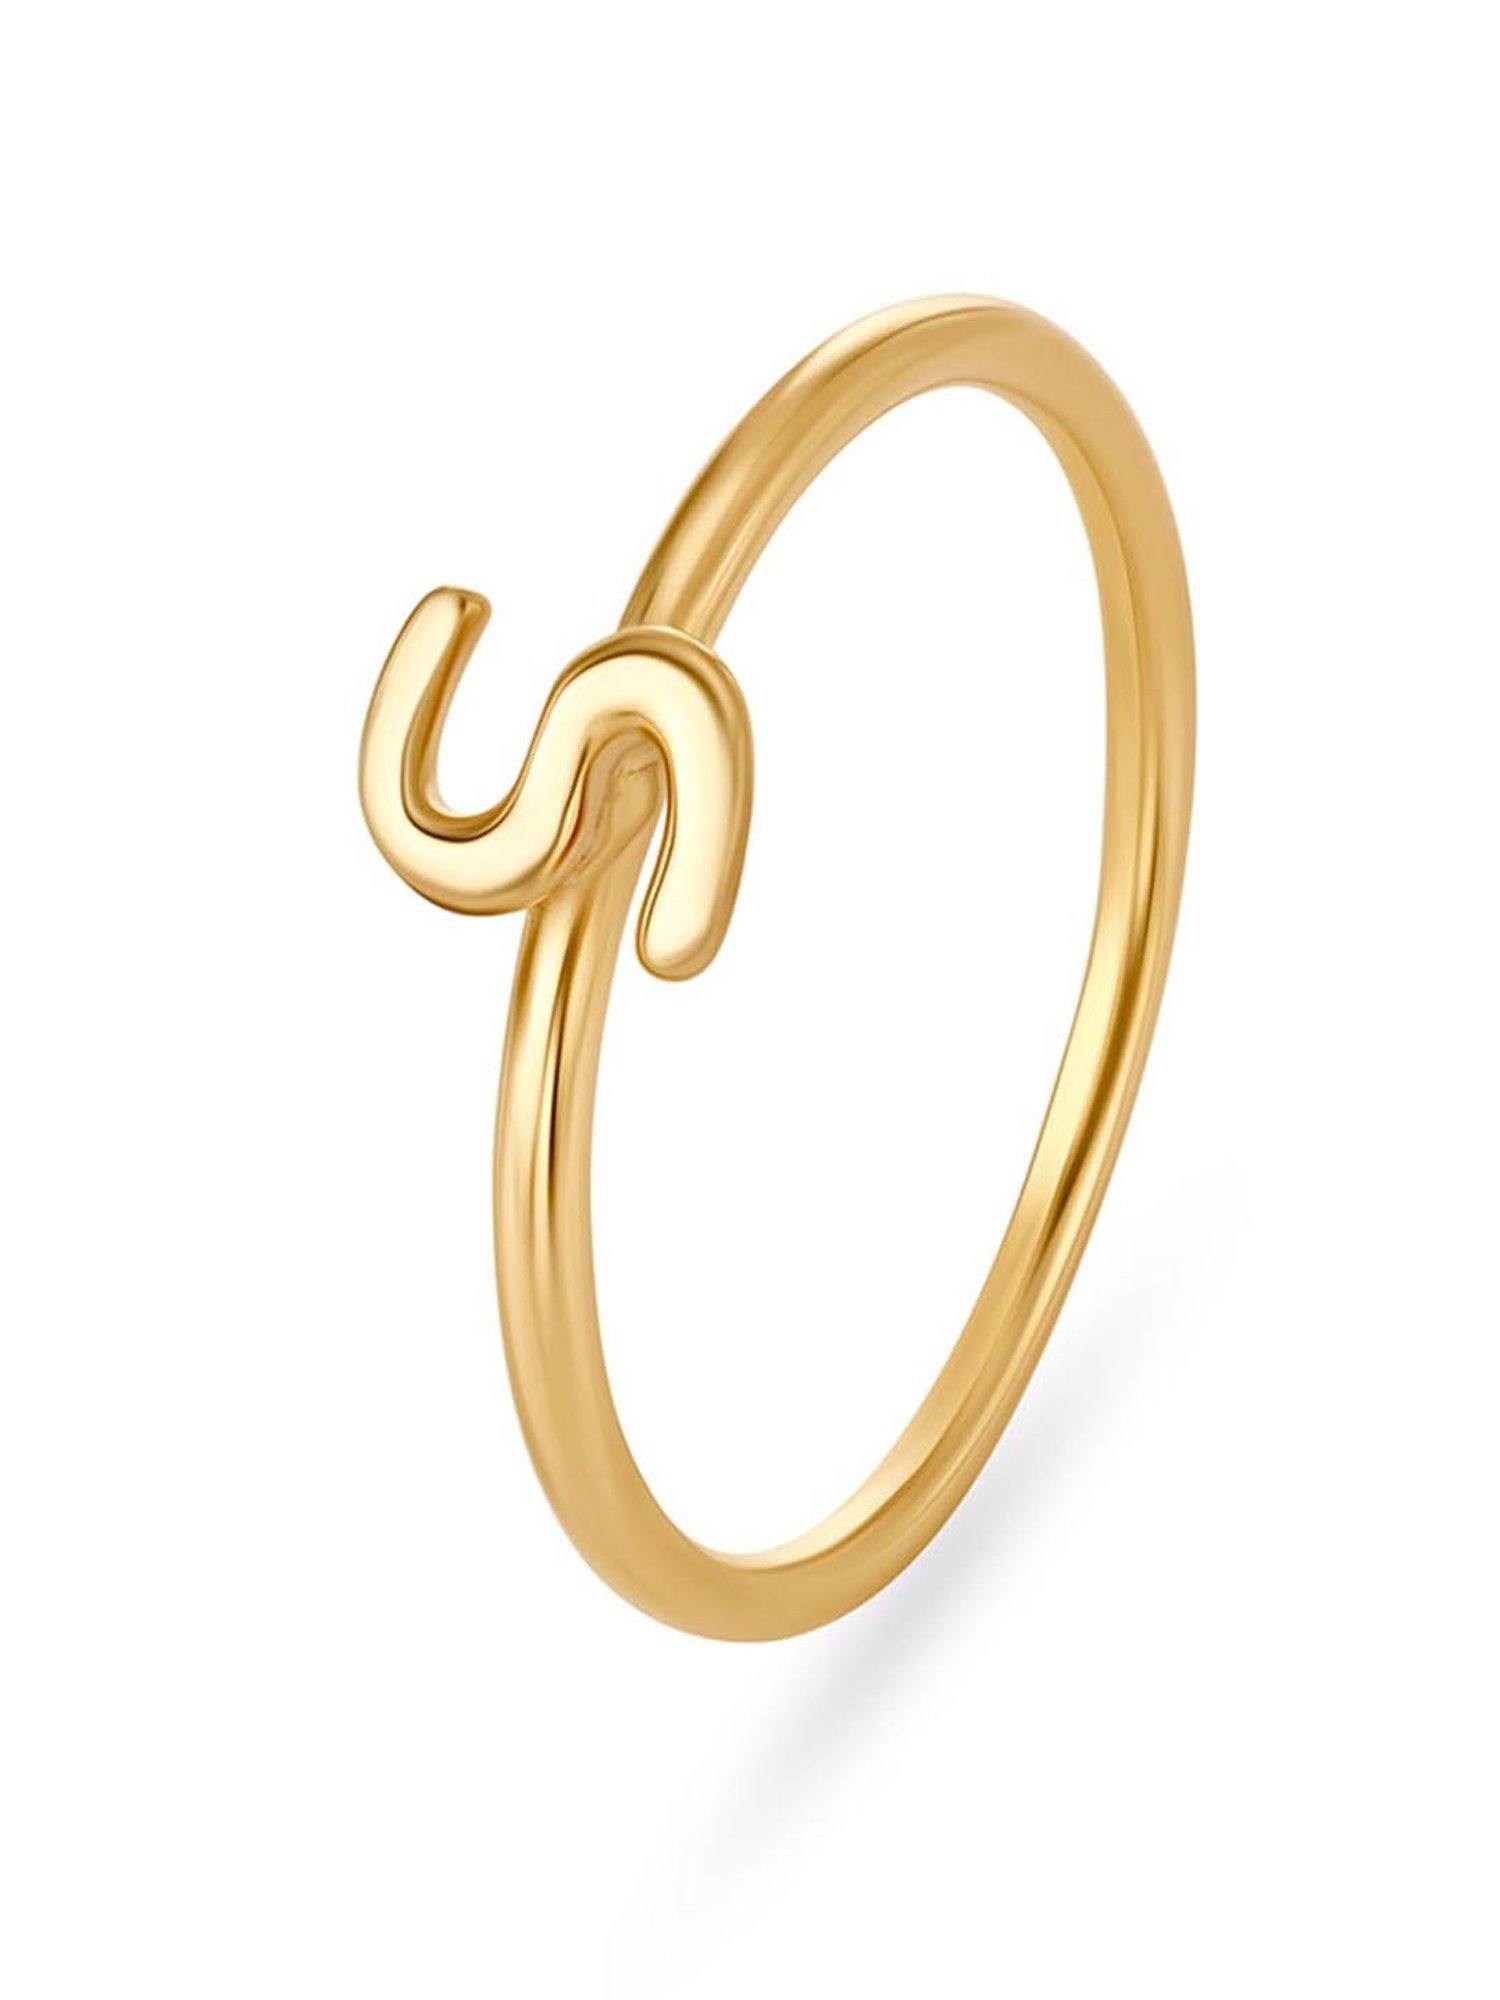 Signature Brilliance: Crown Initial Letter 'S' Ring in 14K Gold with C –  Fantastic Jewelry New York